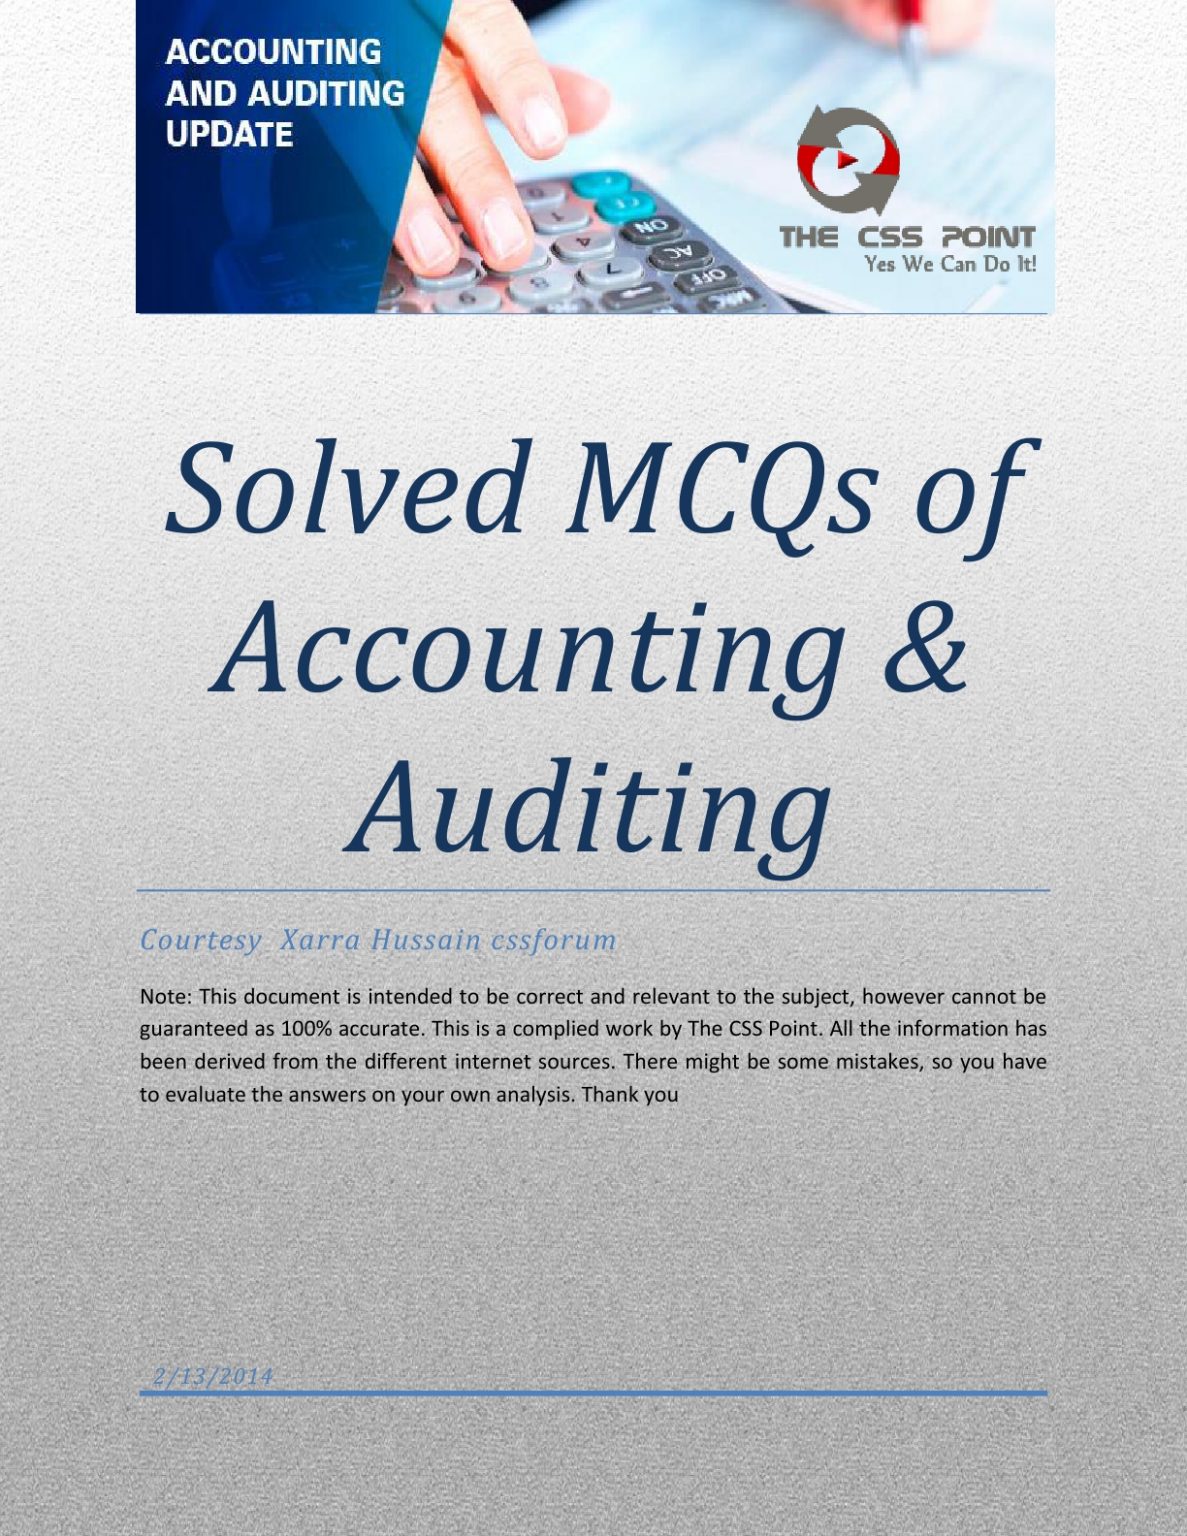 Accounting Auditing Solved MCQs The CSS Point